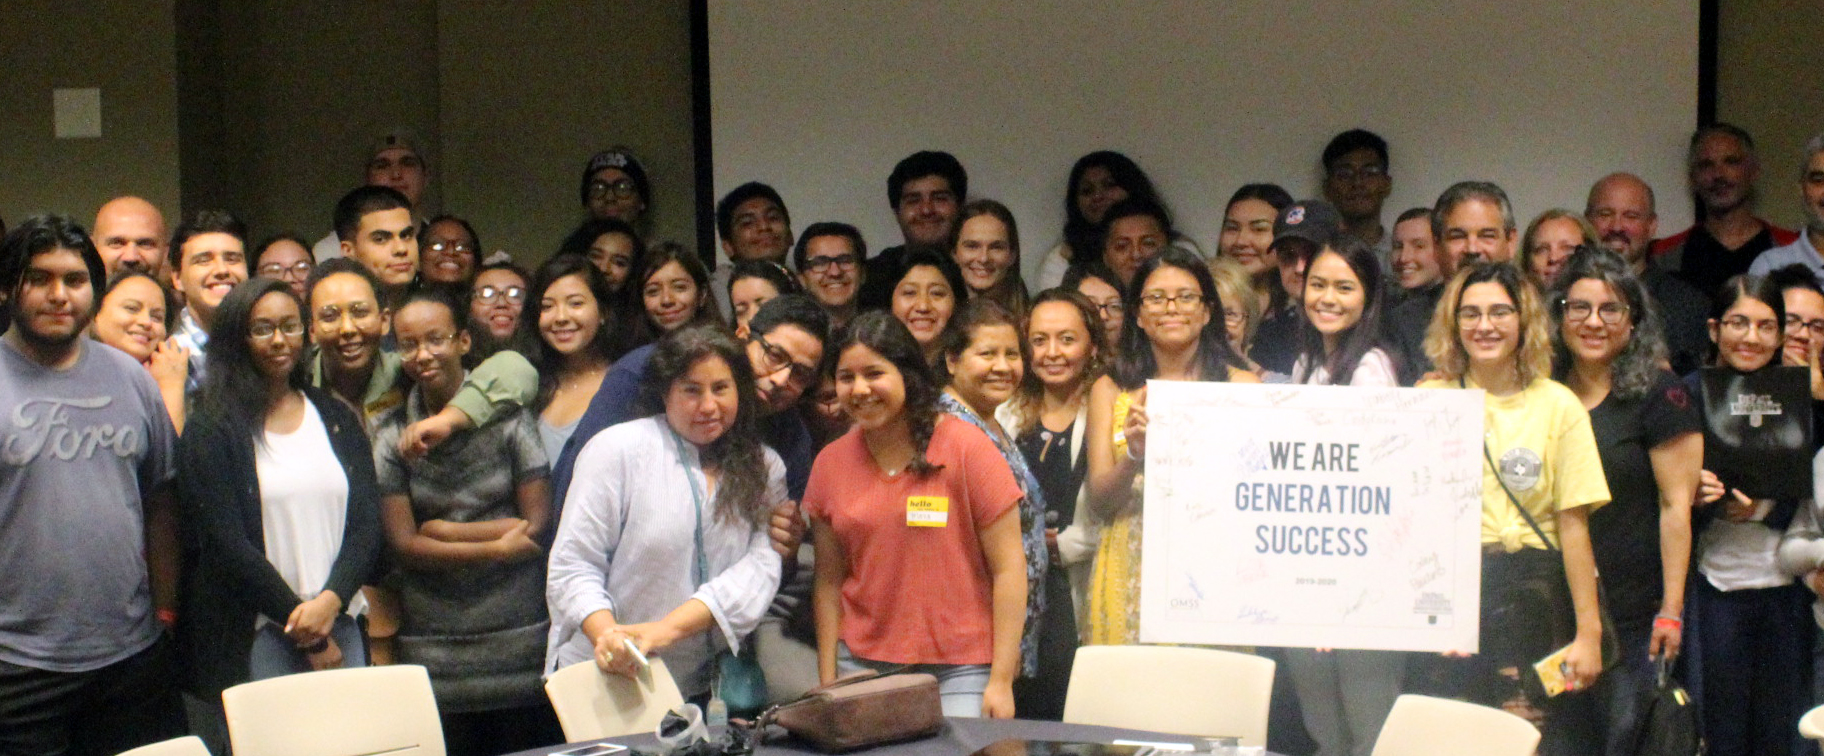 Generation Success, the program aims to ease the transition to college, providing a cohort of first-generation freshman students and their families the tools and resources necessary to thrive at DePaul.